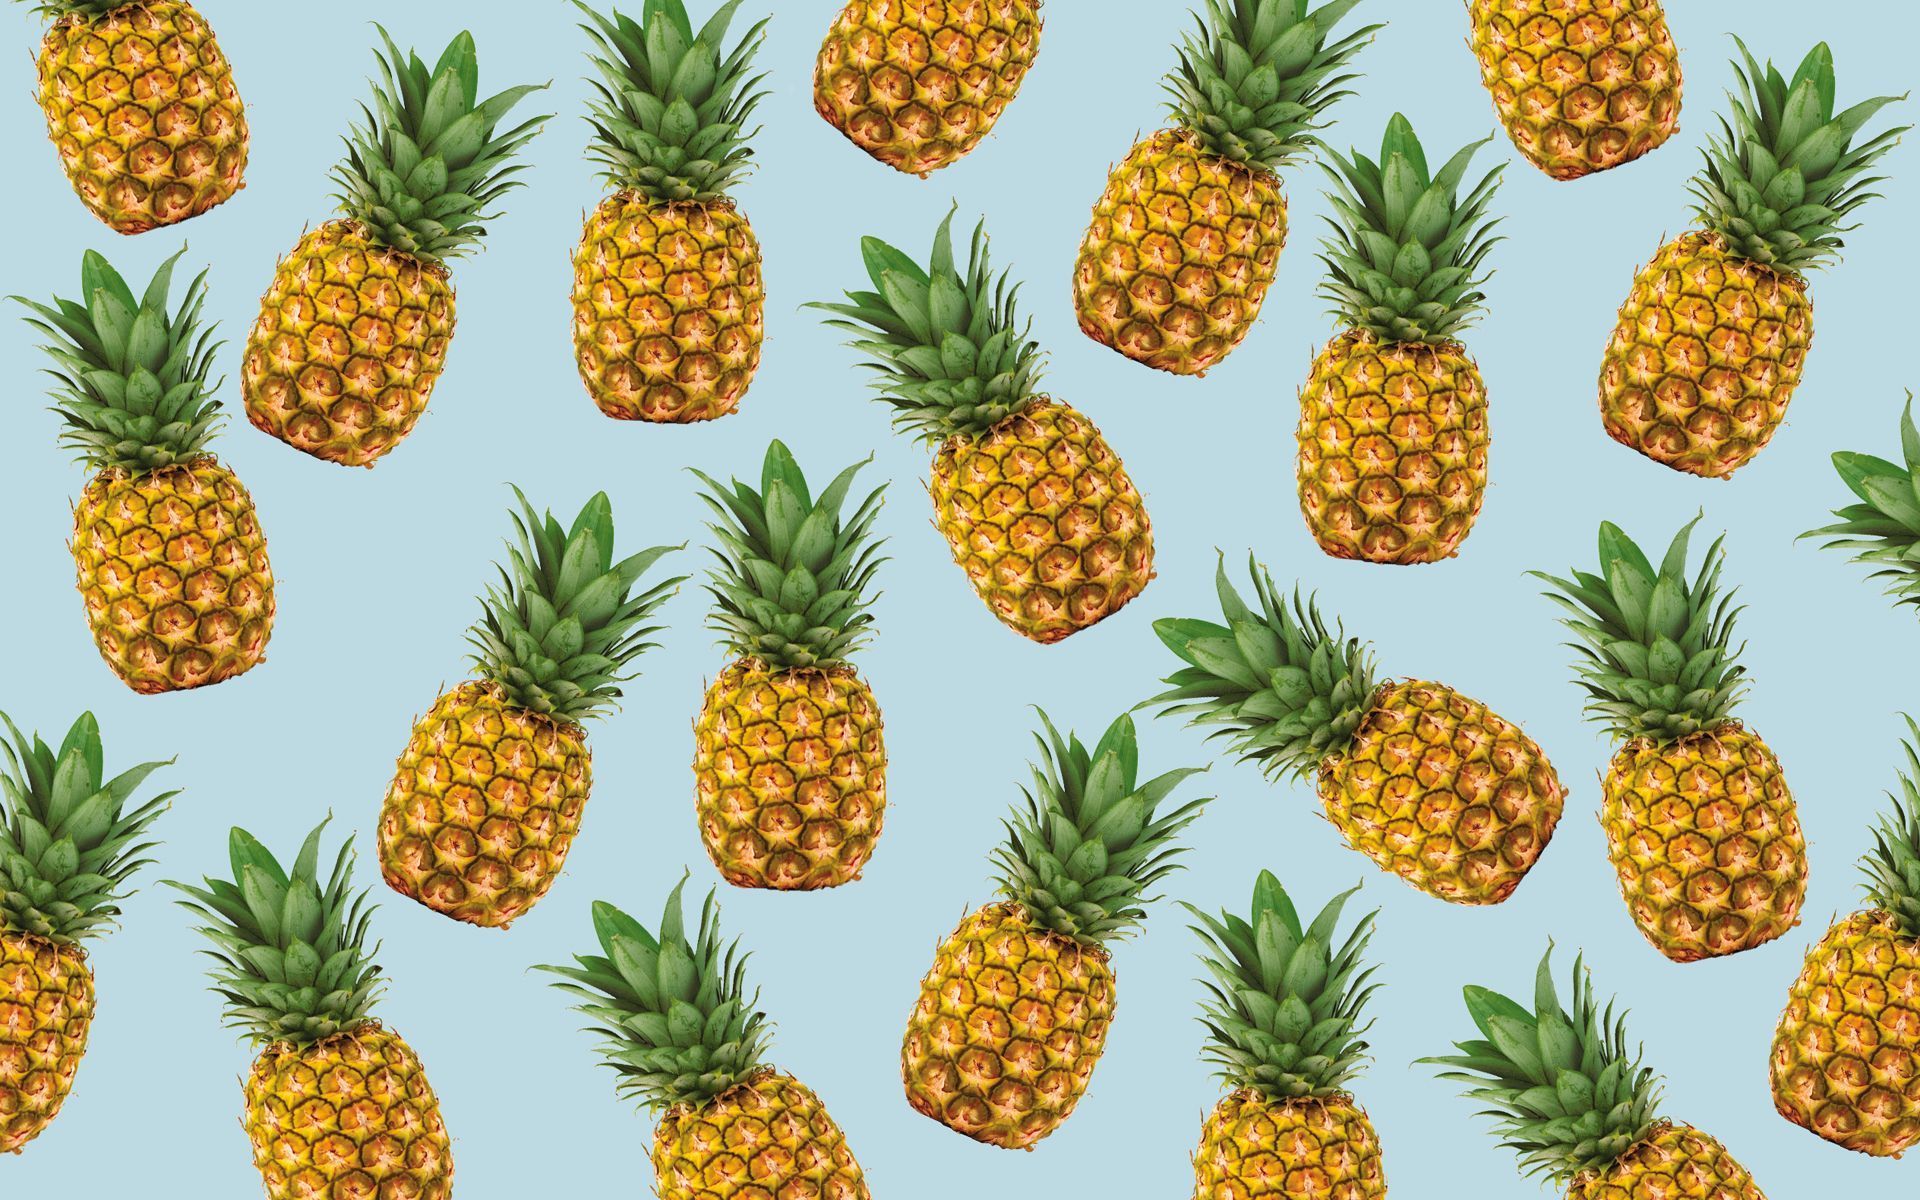 Colorful Pineapple Computer Wallpaper at. Computer wallpaper desktop wallpaper, Laptop wallpaper desktop wallpaper, Cute wallpaper for computer